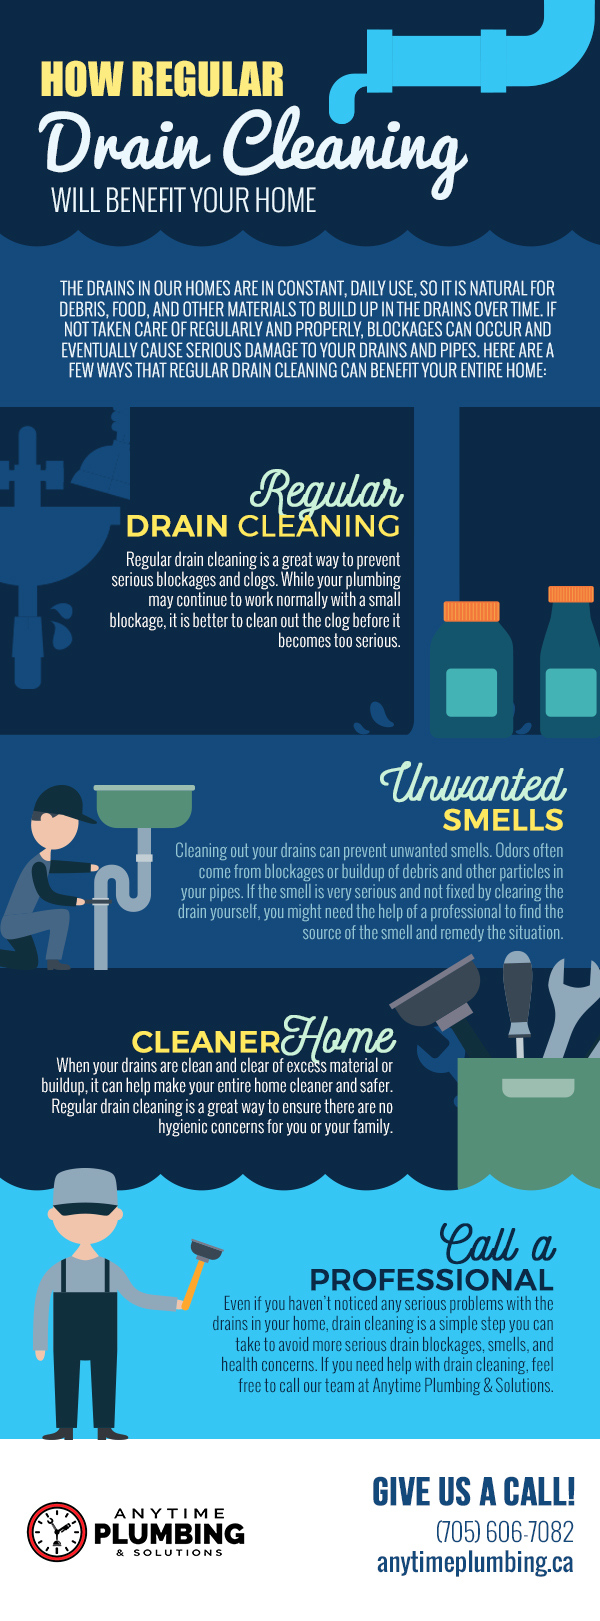 How Regular Drain Cleaning Will Benefit Your Home